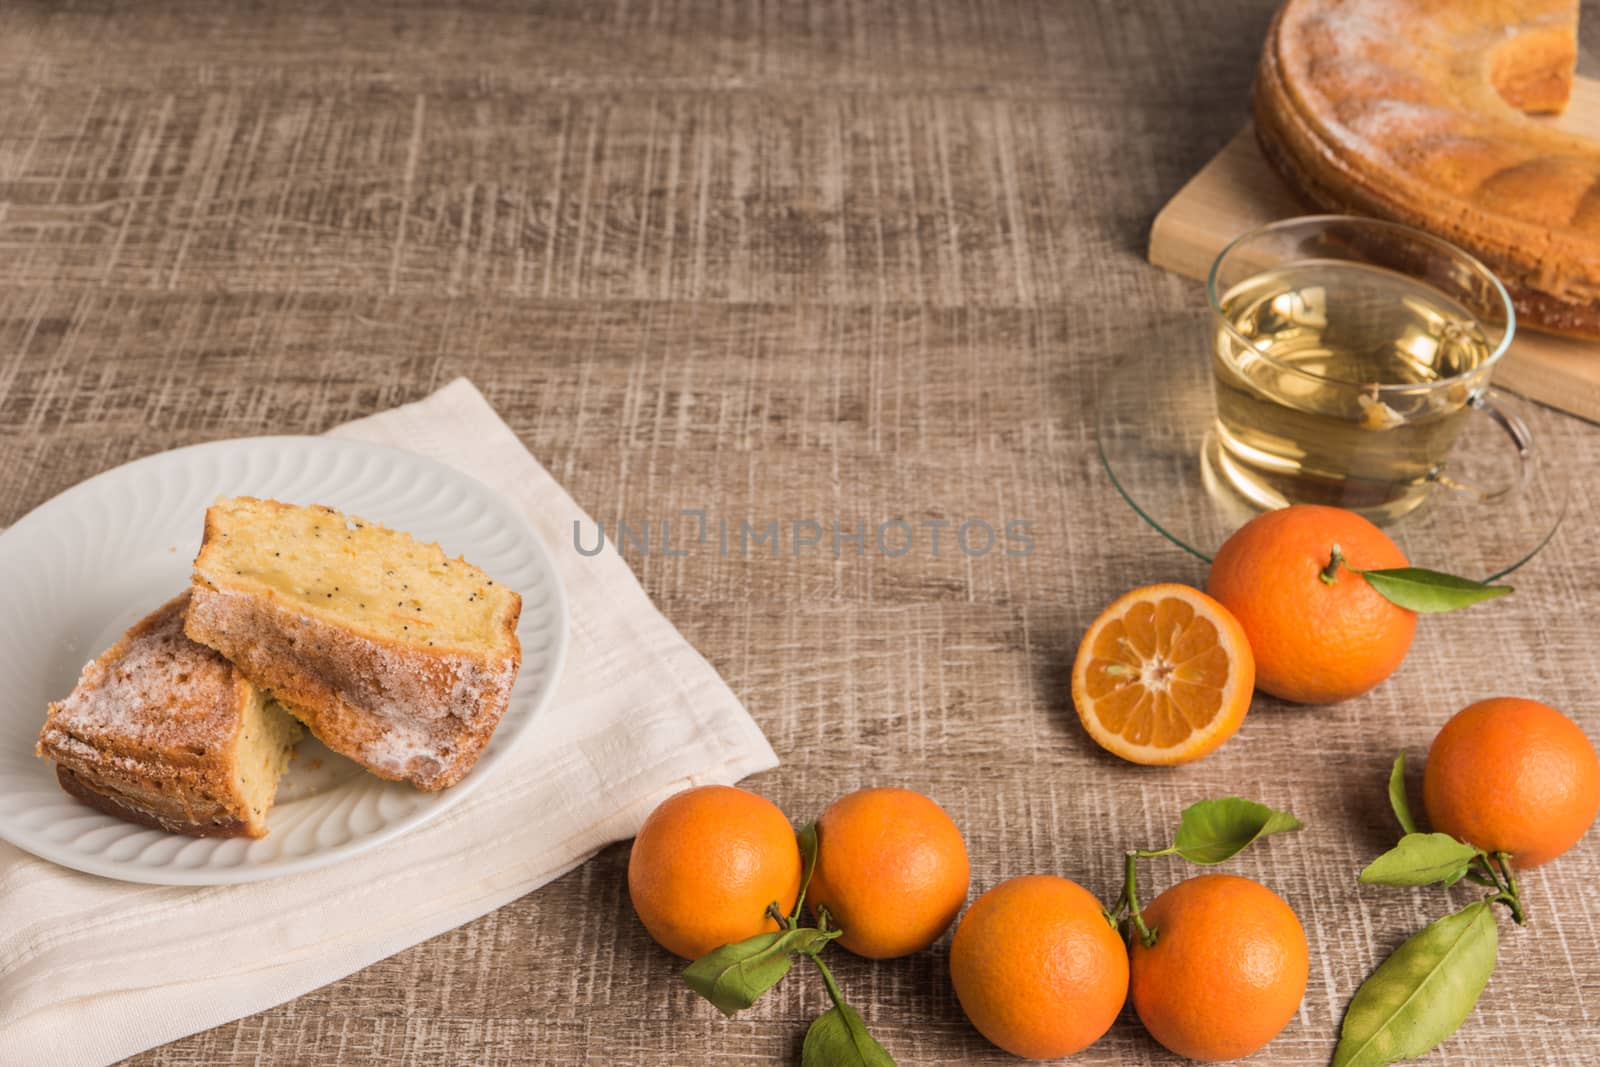 Slices of clementine cake with powdered sugar topping and cup of by AnaMarques